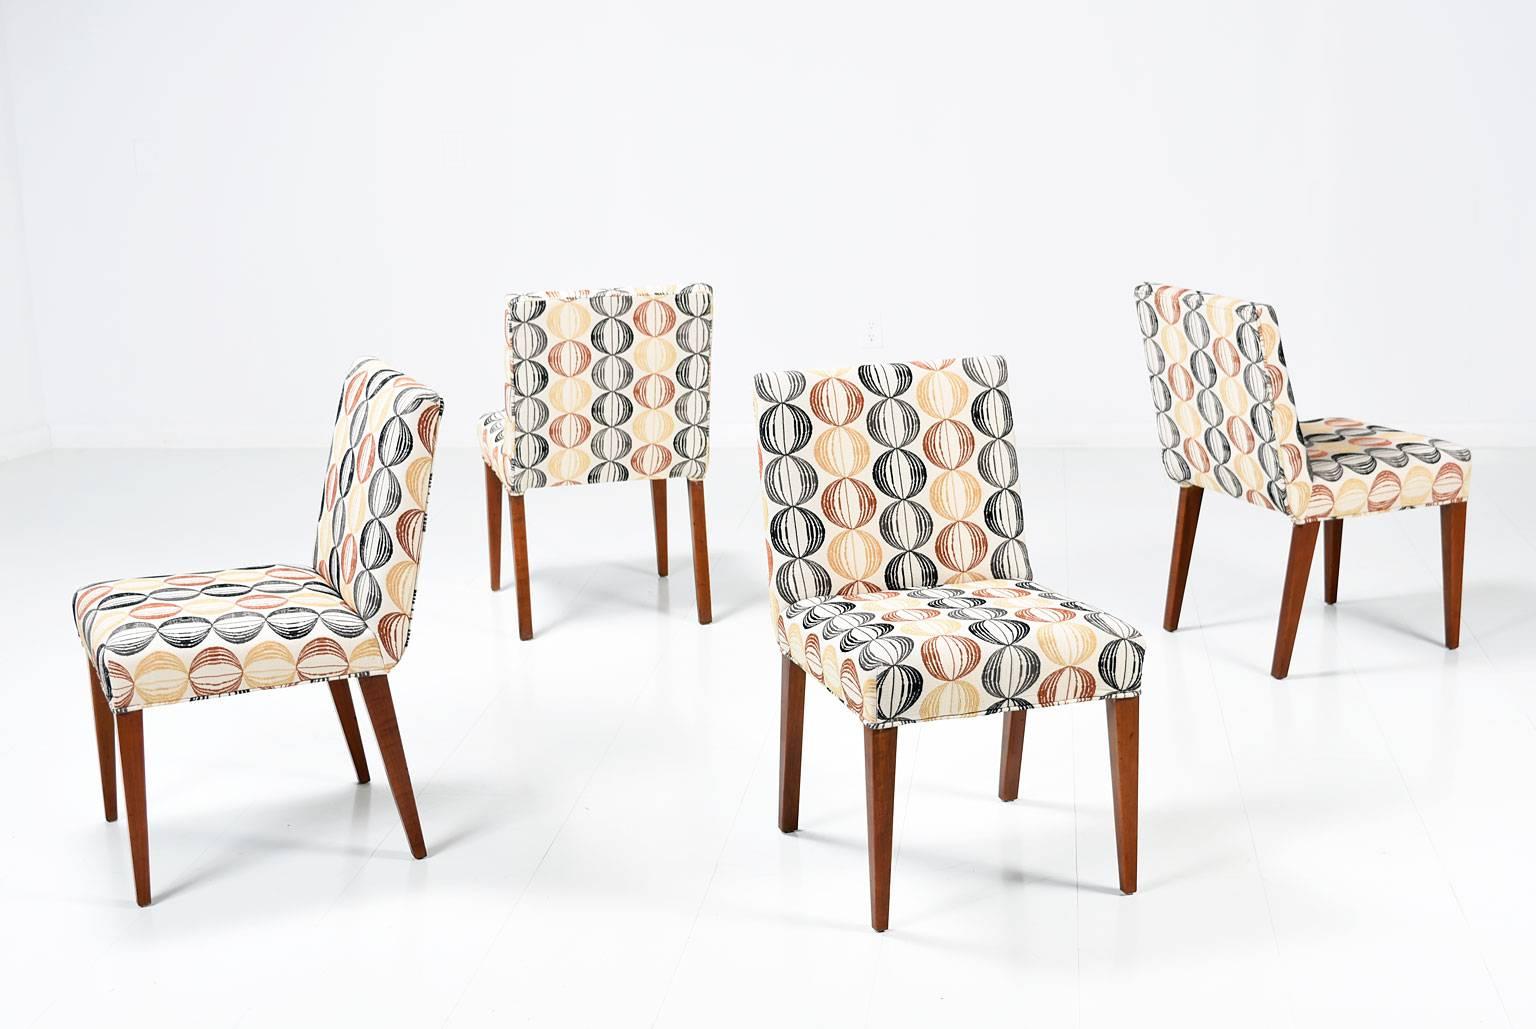 Set of 4 Mid-Century Modern Widdicomb slipper chairs, #4082. This handsome set features four armless side chairs, with walnut legs. They have been recently recovered in a luxurious, fun and colorful fabric, making them a great addition to any room.